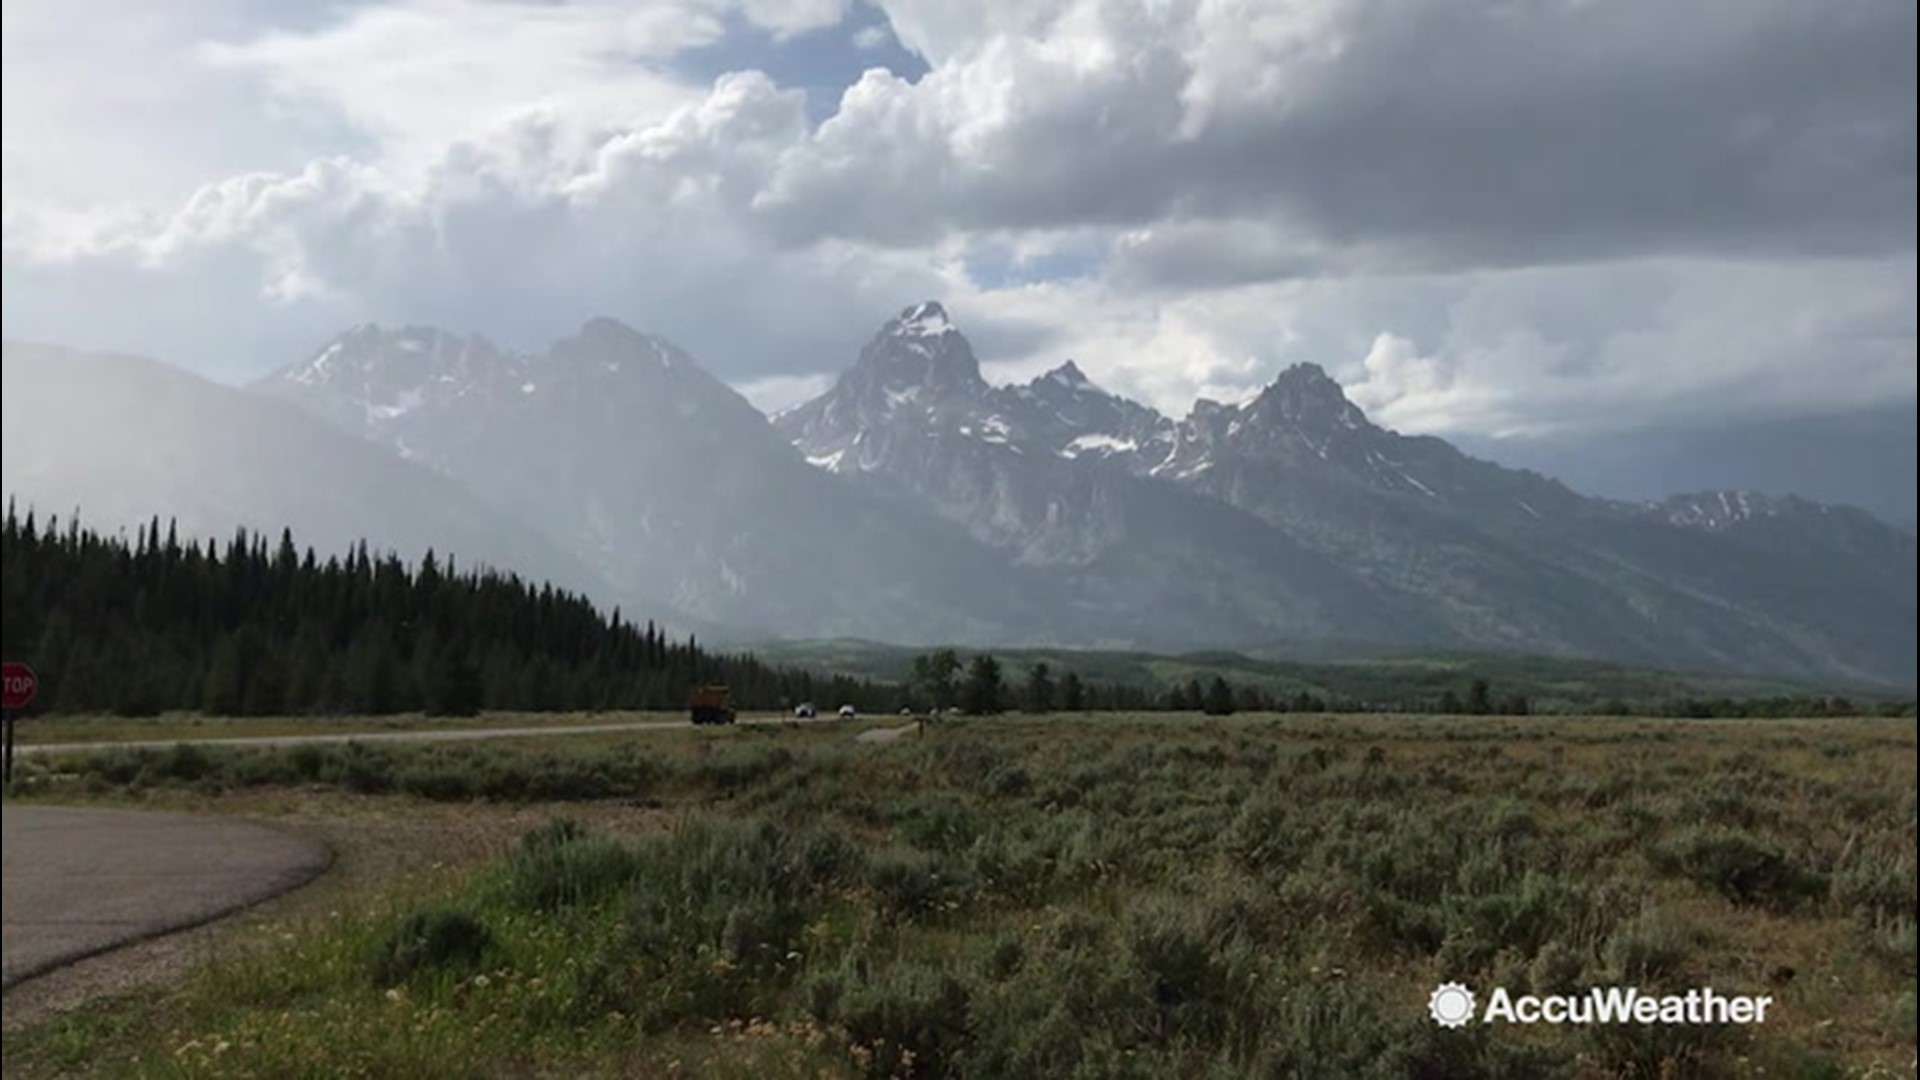 Lincoln Riddle spends a rainy, yet beautiful, day at The Grand Teton National Park in Wyoming as AccuWeather's #GreatAmericanRoadTrip continues on July 23.